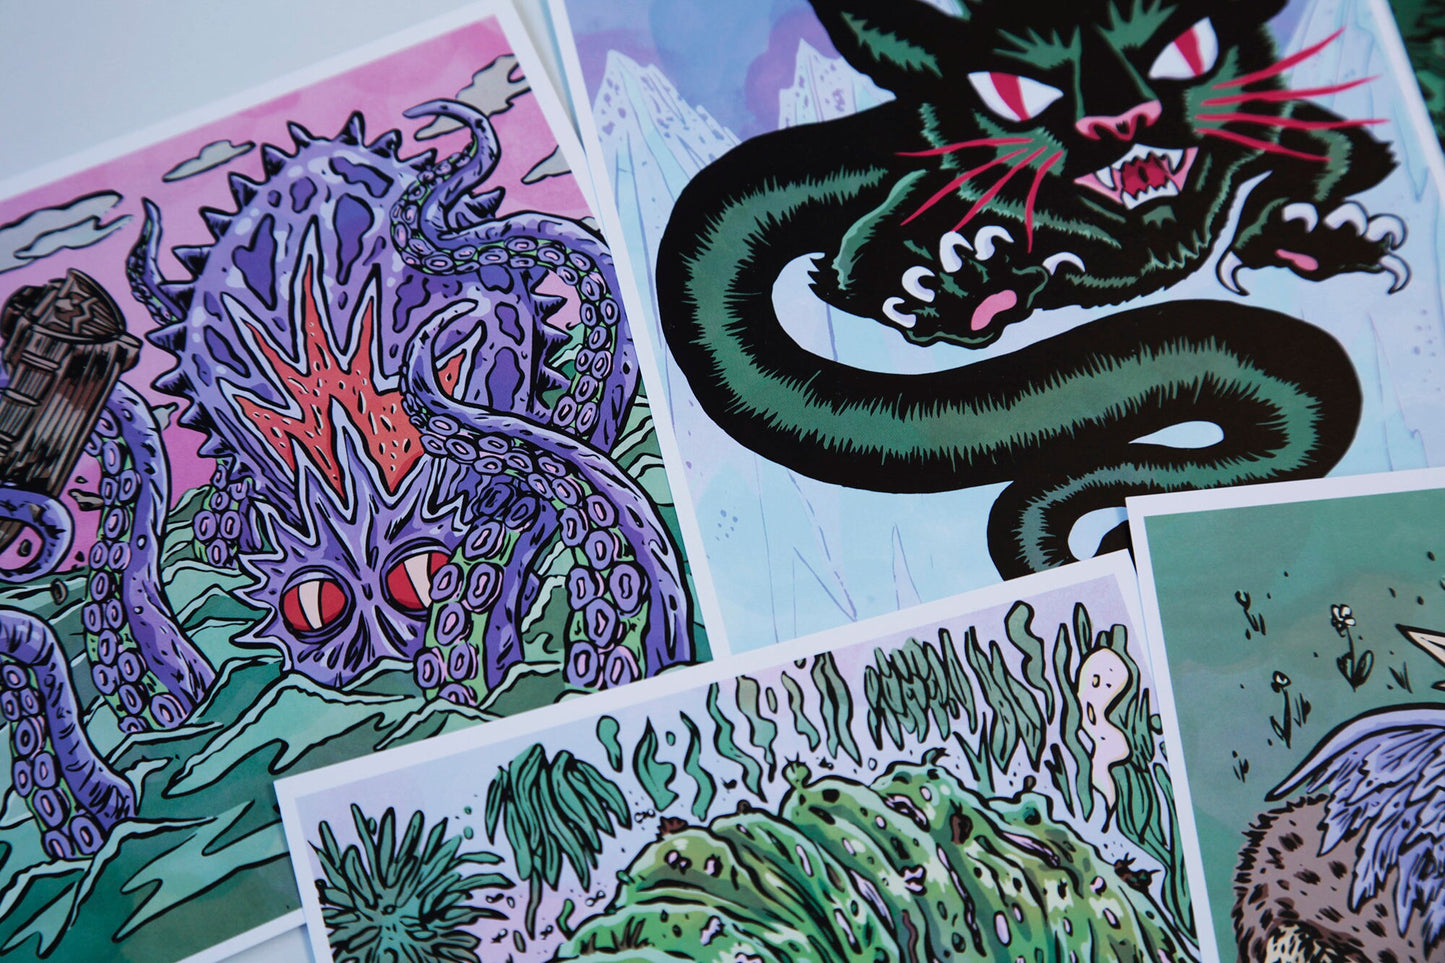 CRYPTIDS - Mini Poster Cards (Set 2)